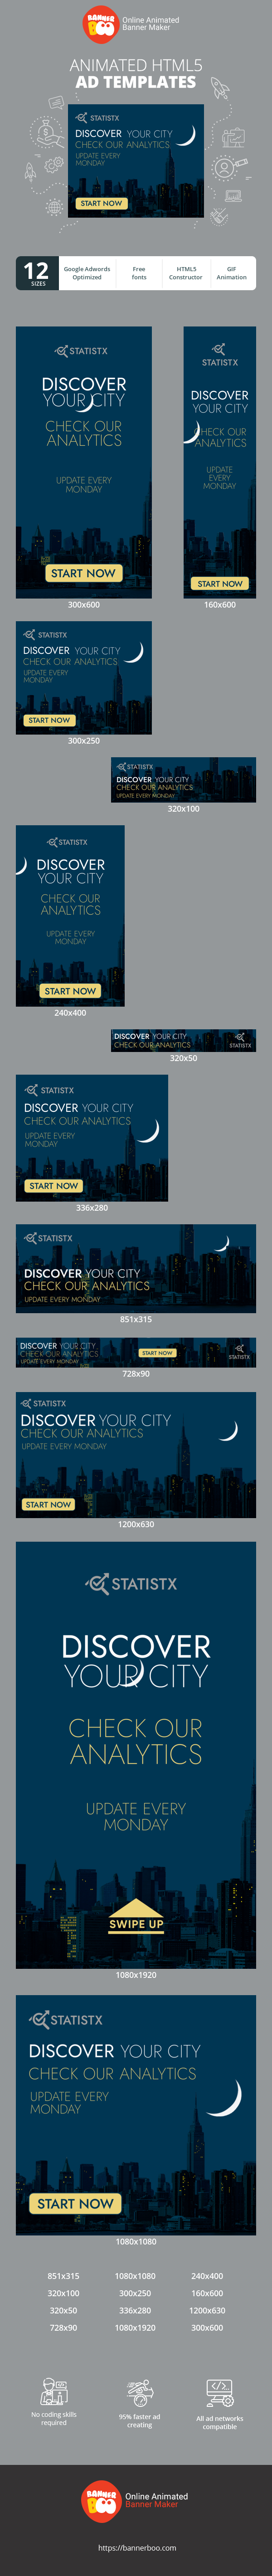 Banner ad template — Discover Your City Check Our Analytics — Update Every Monday